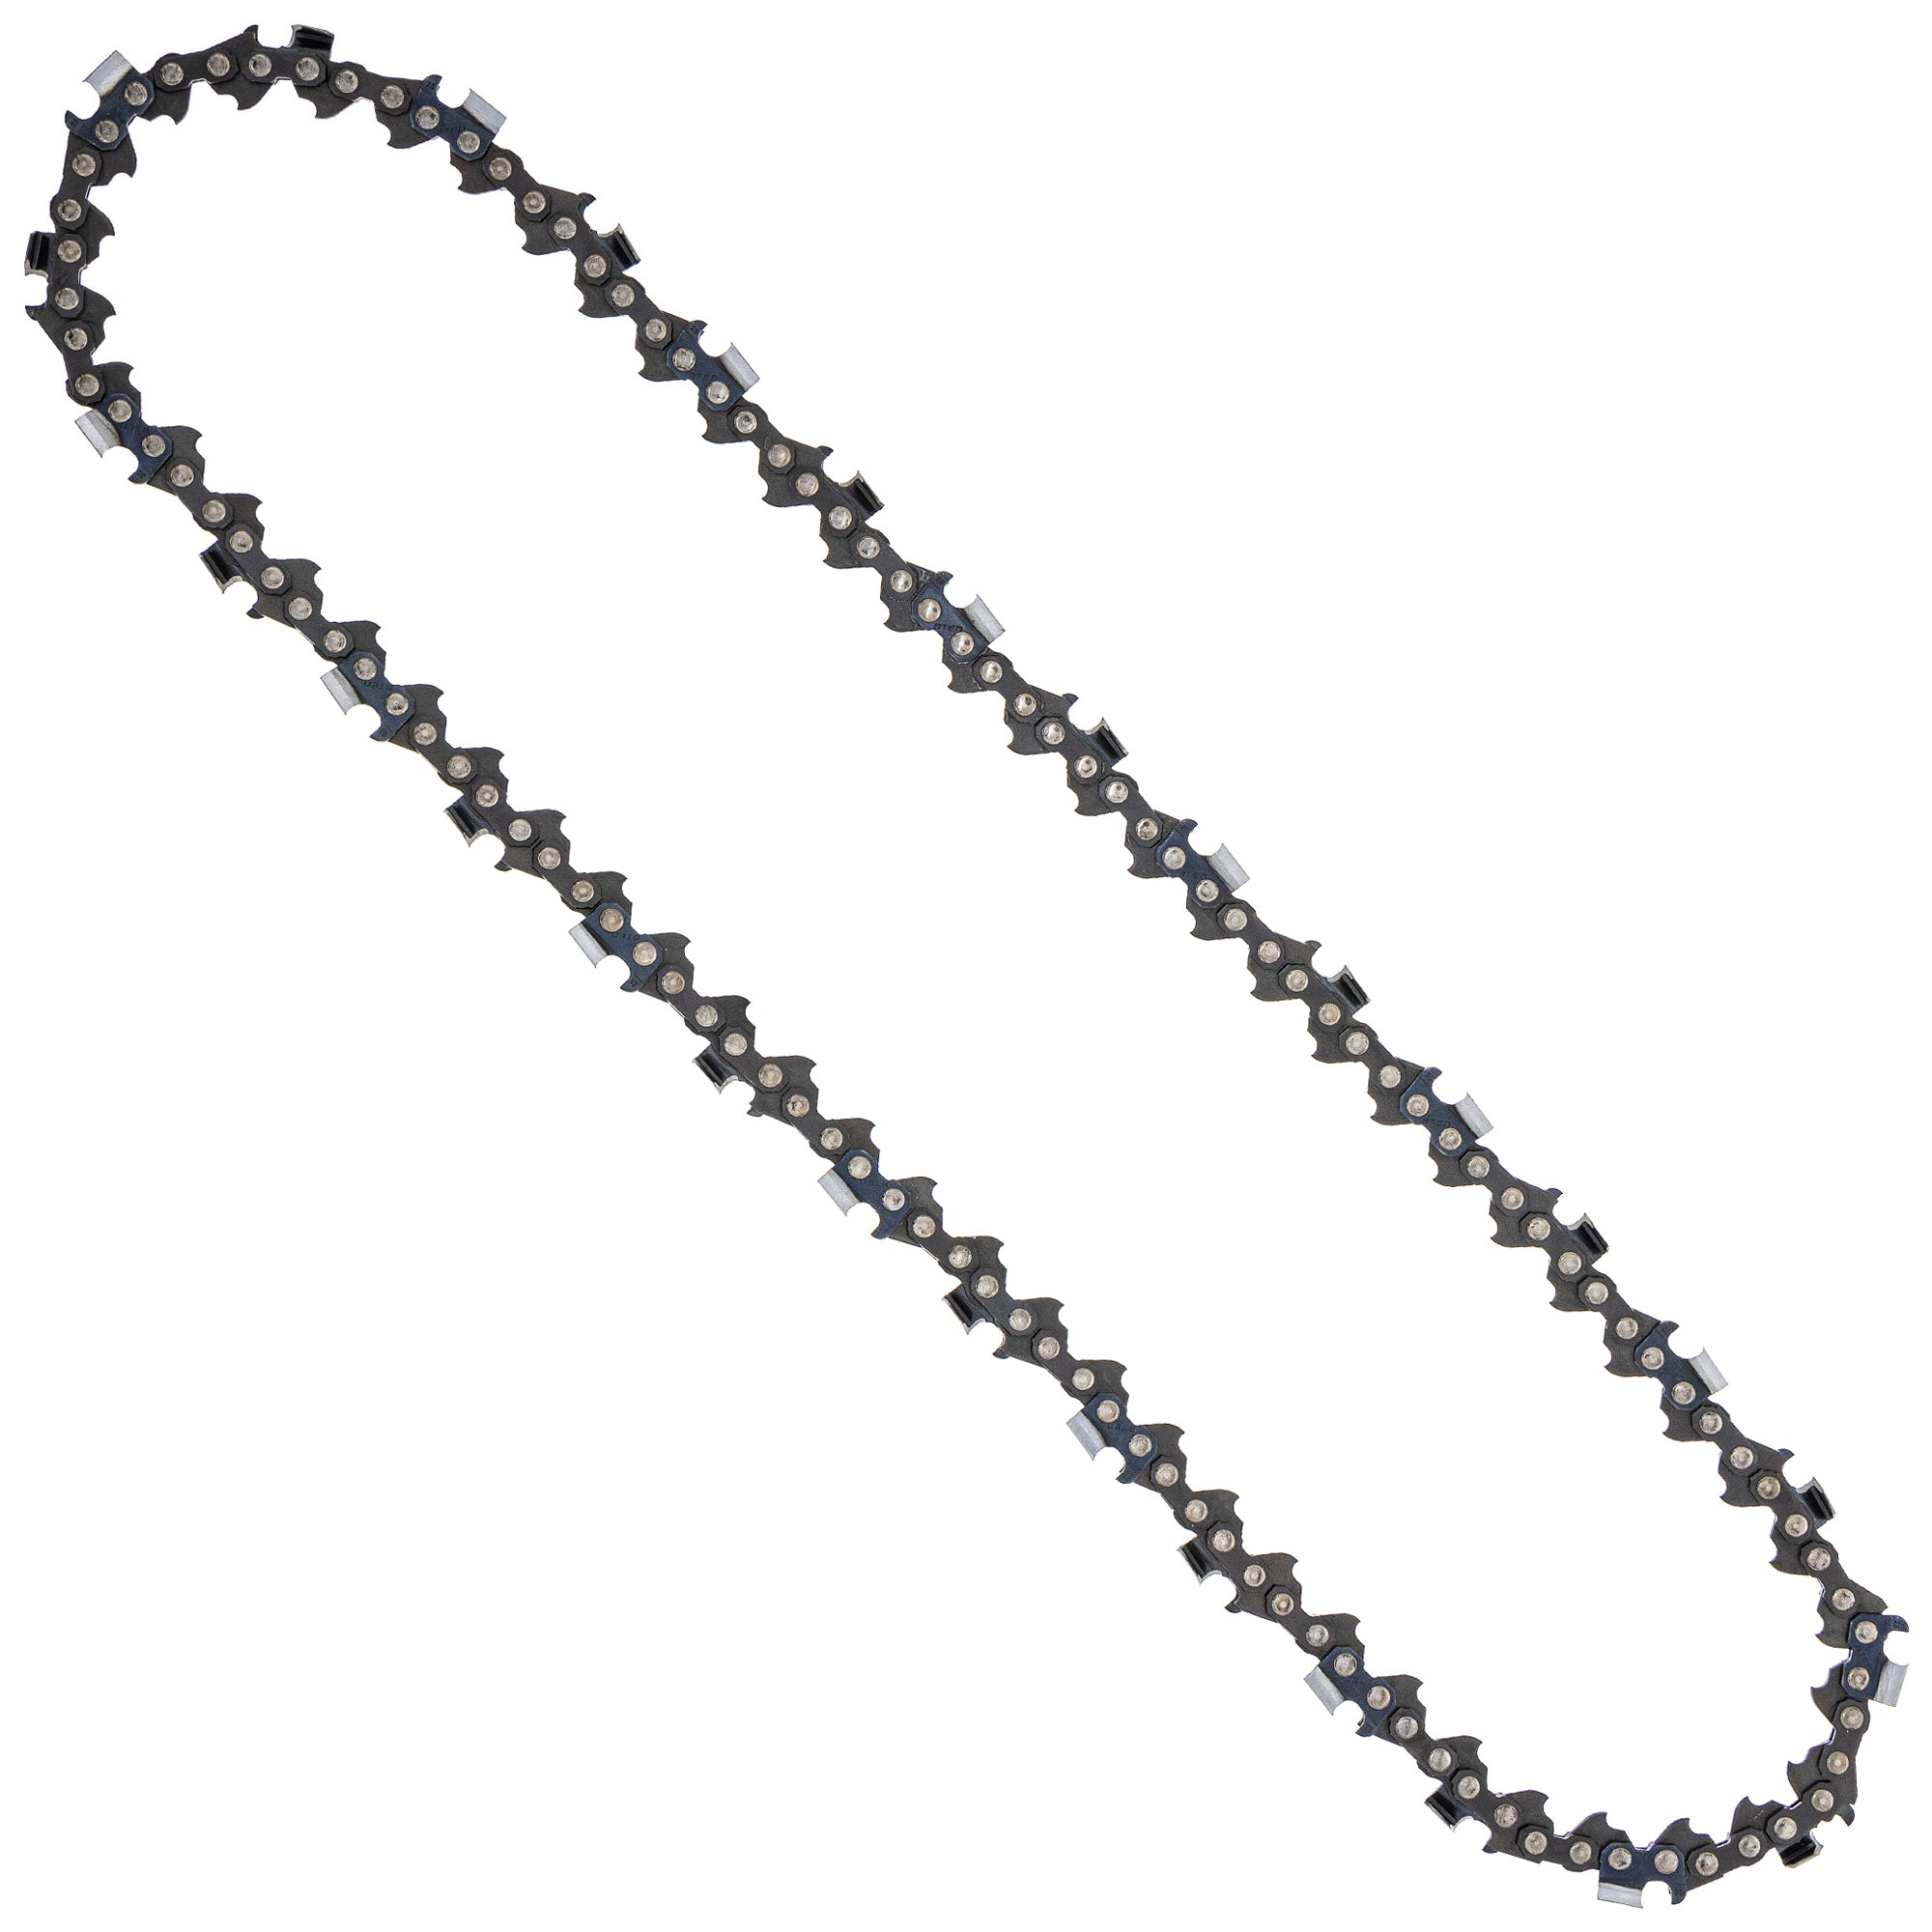 8TEN 810-CCC2360H Chain 2-Pack for zOTHER Oregon Husqvarna Poulan